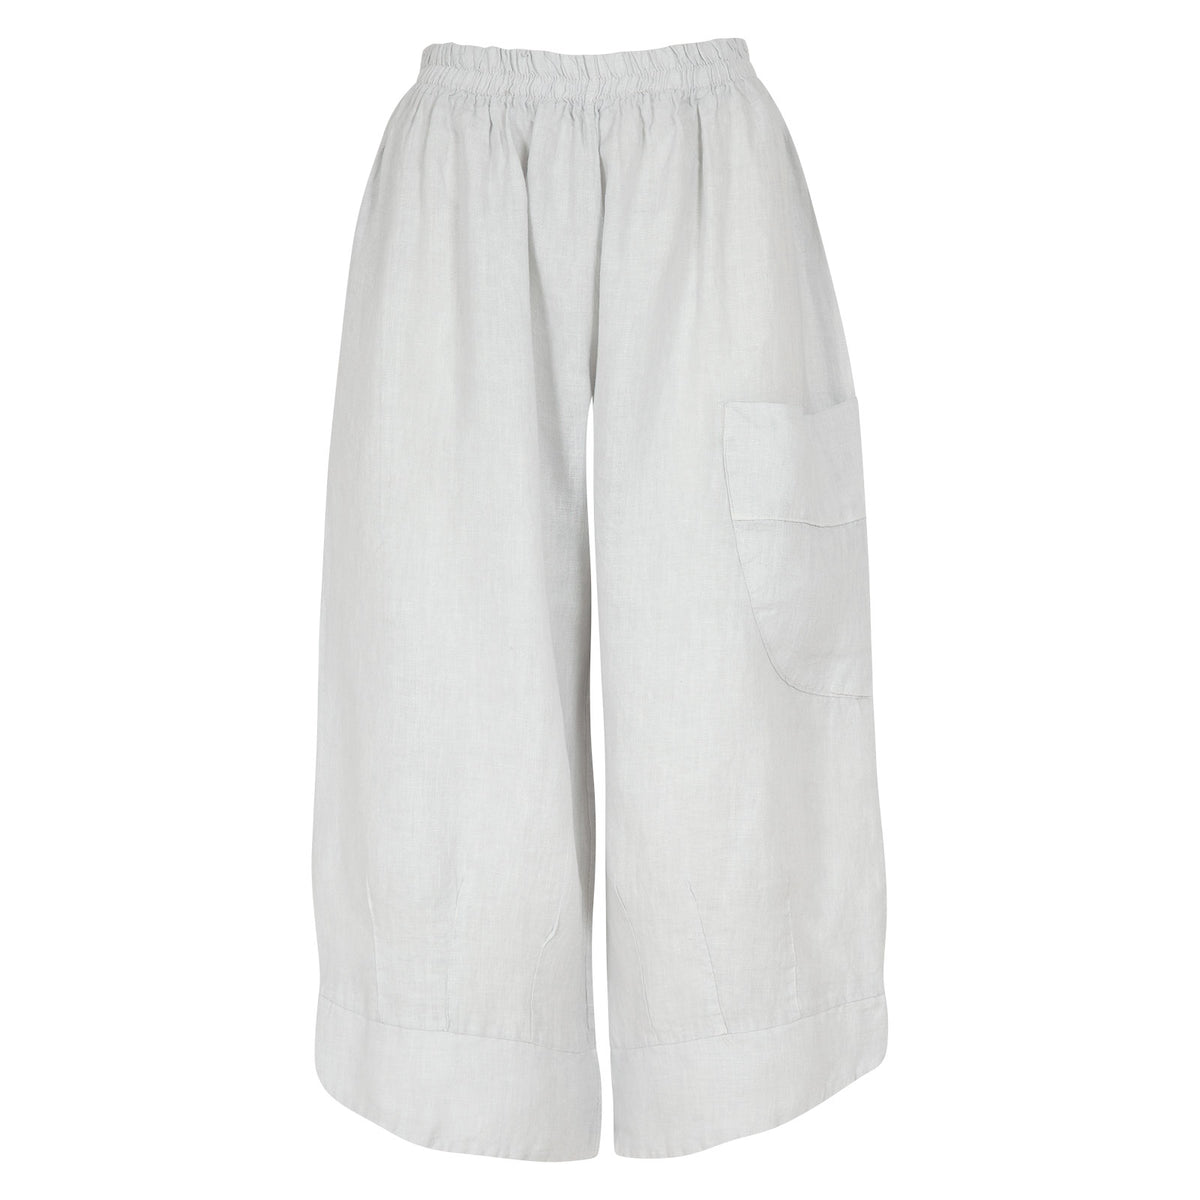 Ridley Collections - Delta Pant in Silver - Womens Clothing - Linen ...